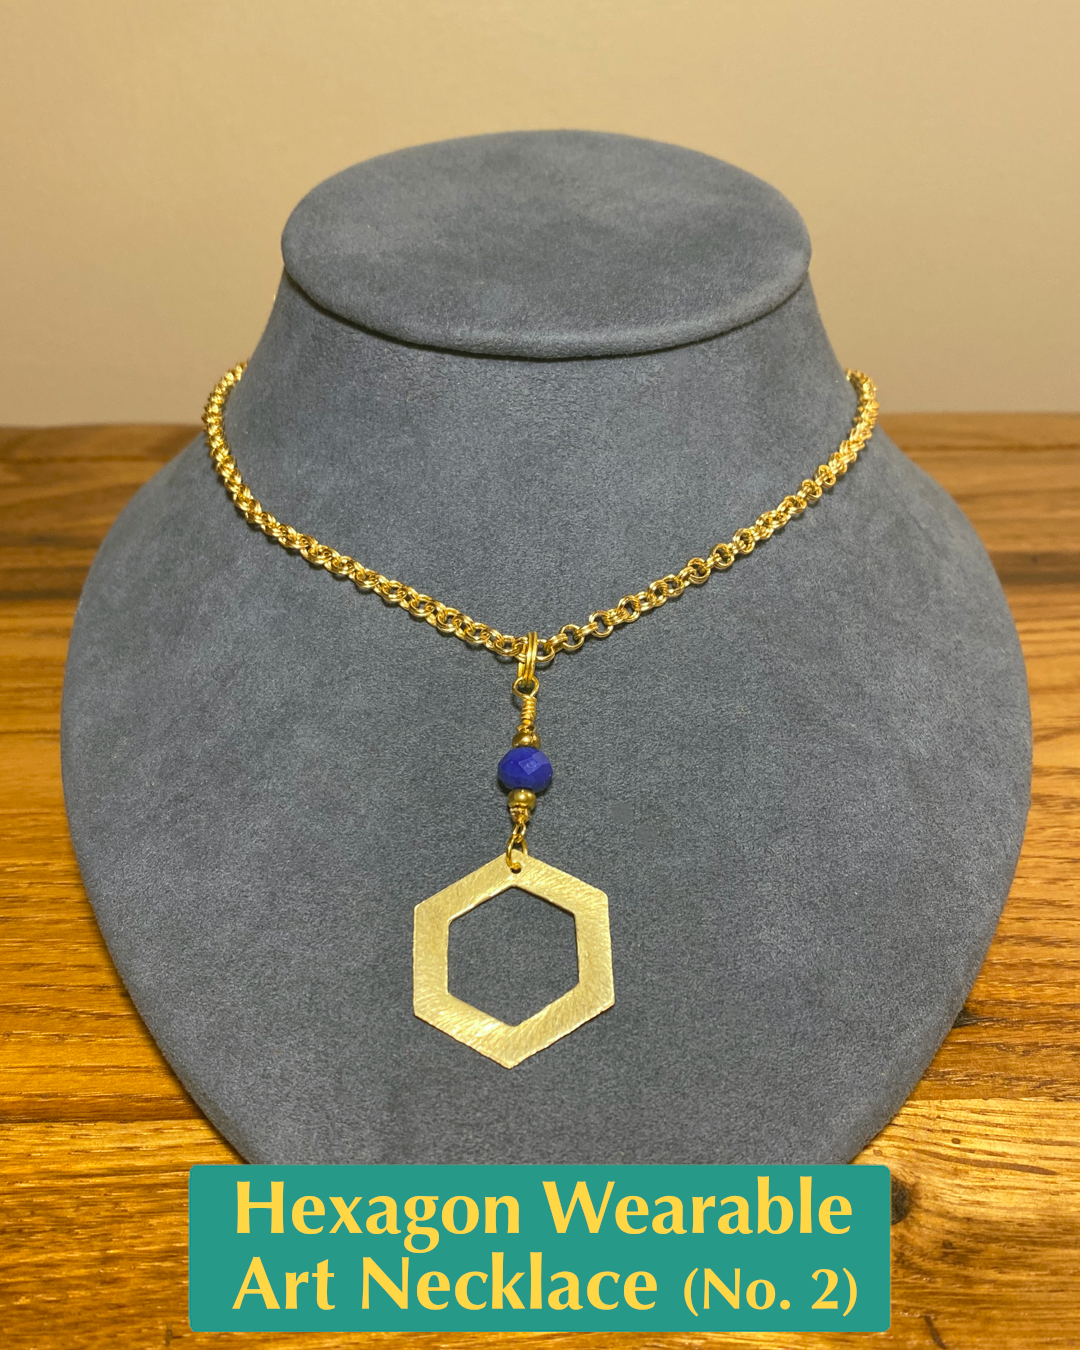 Handmade chain necklace with blue crystal and gold brass bead accents and a hexagon pendant